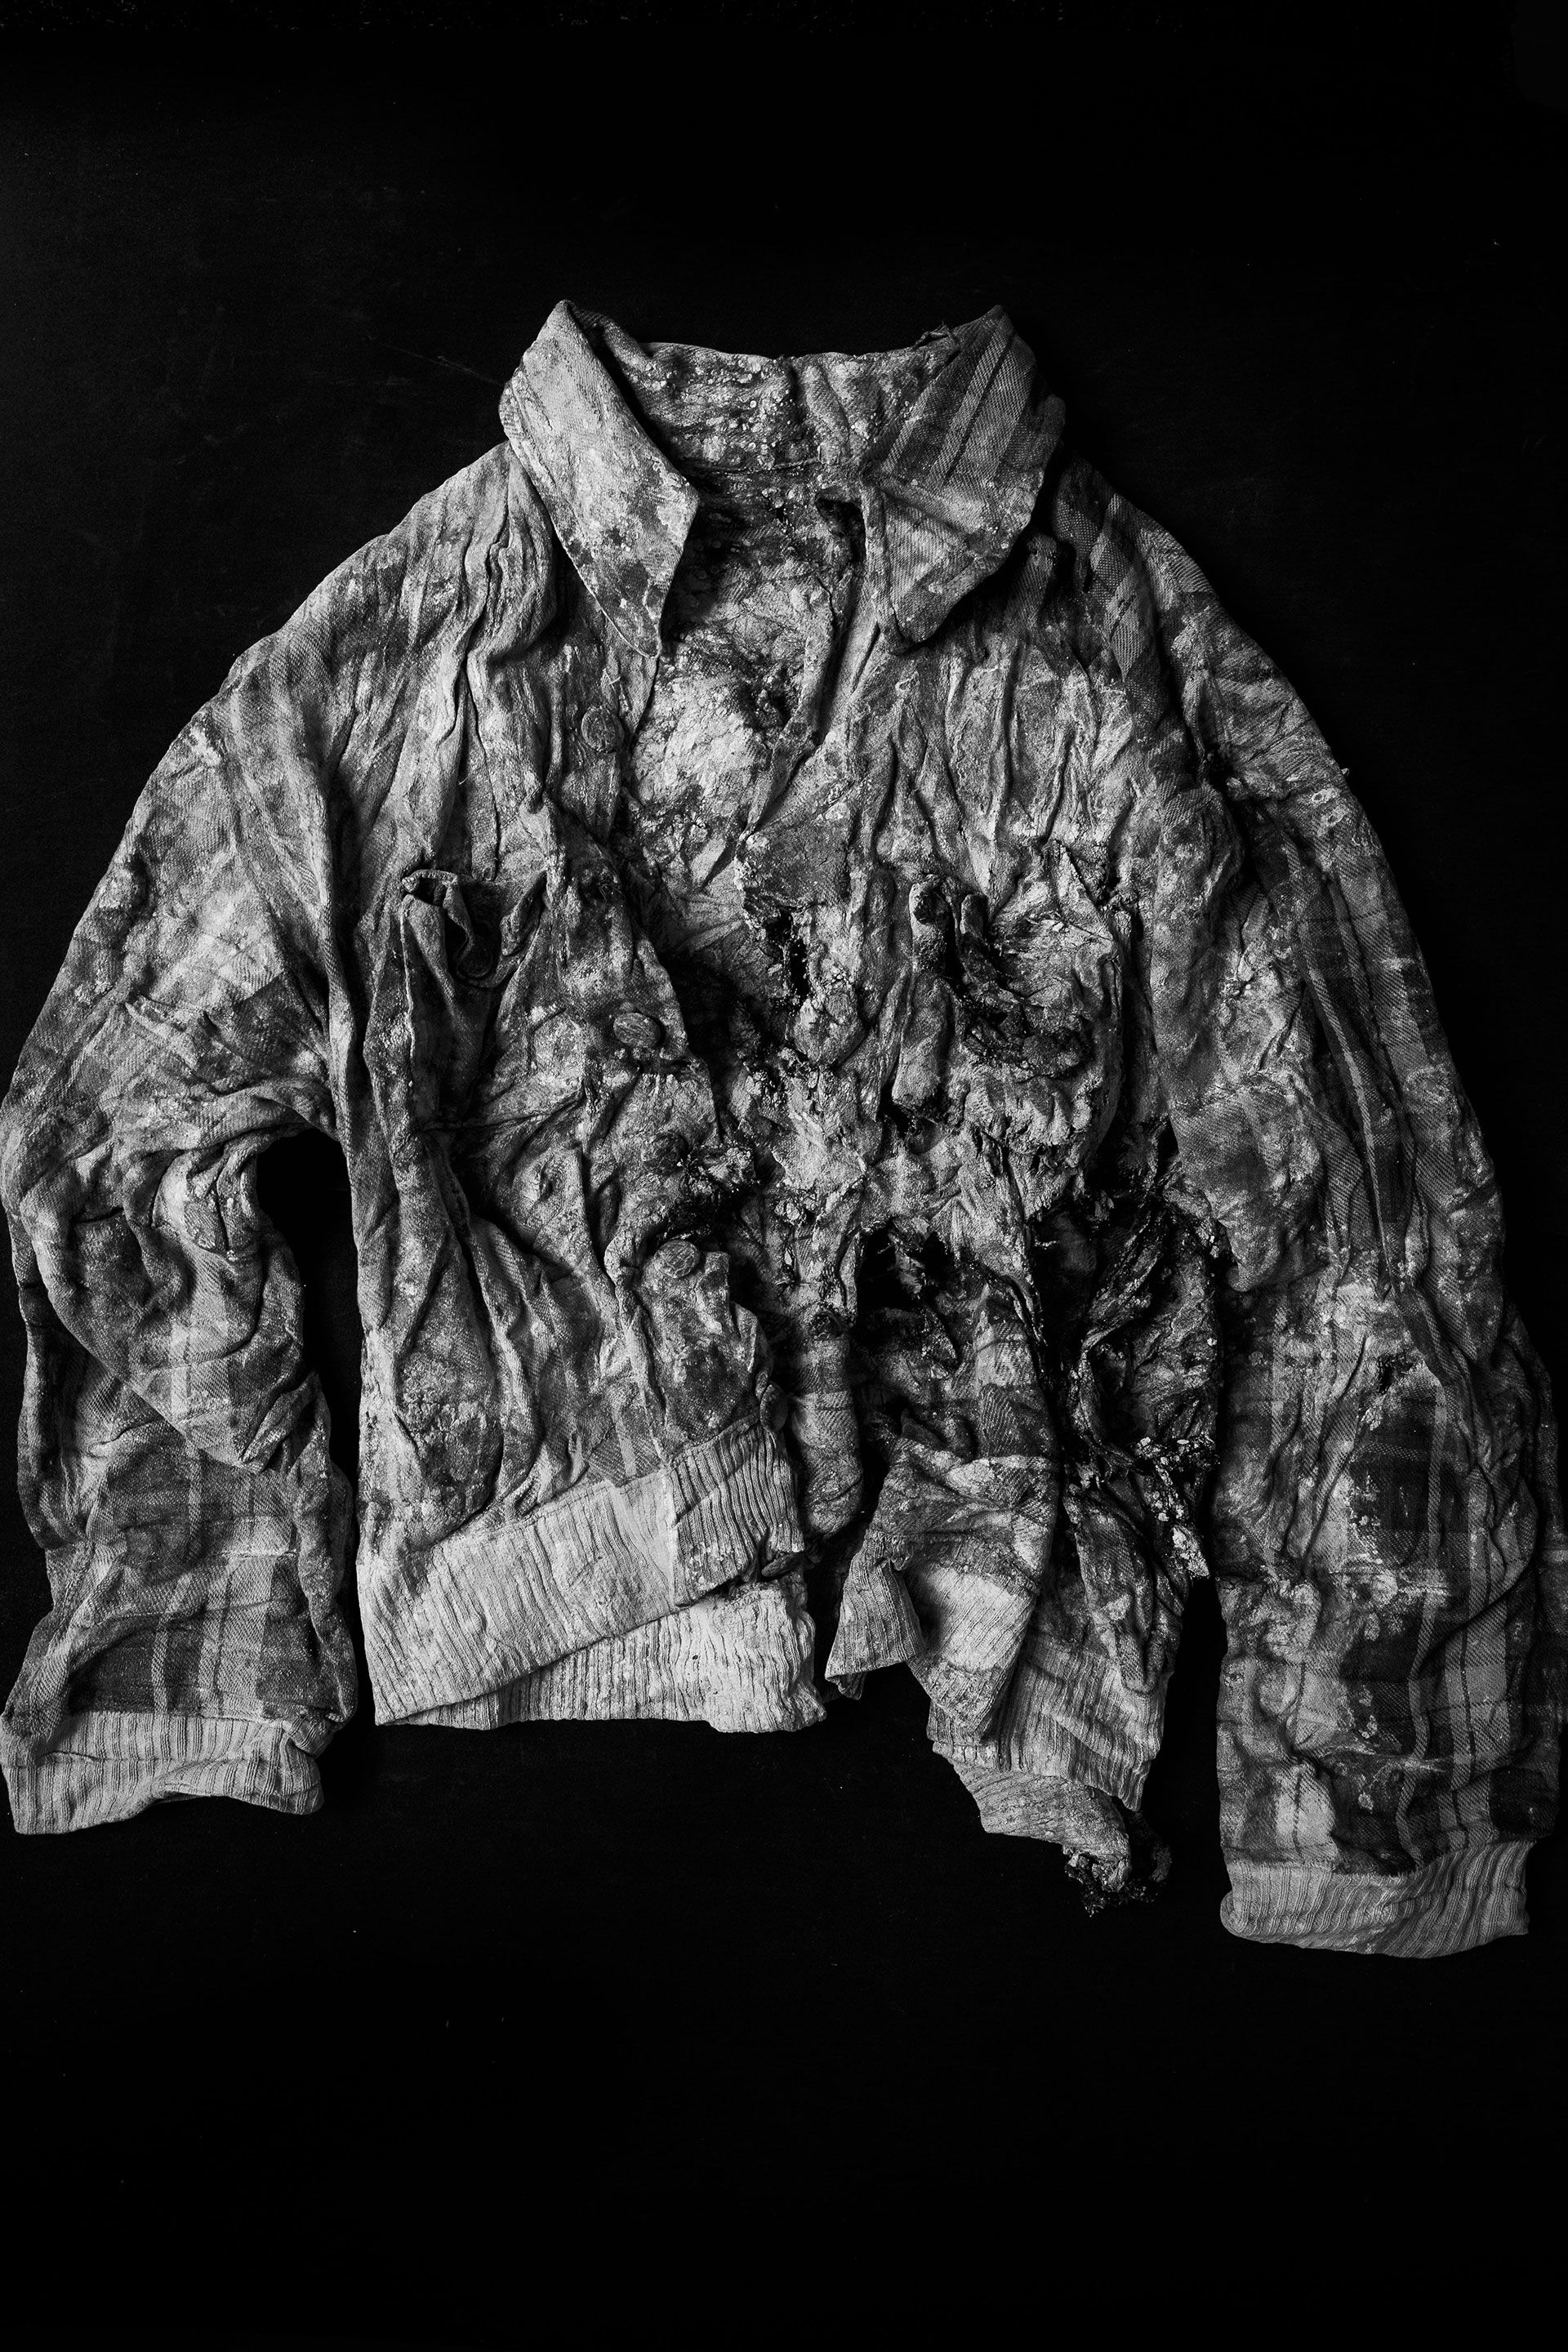 A jacket found in mass grave number 128 in Paterna, Valencia in May 2019. The garment belonged to a person killed by several gunshots in 1941.